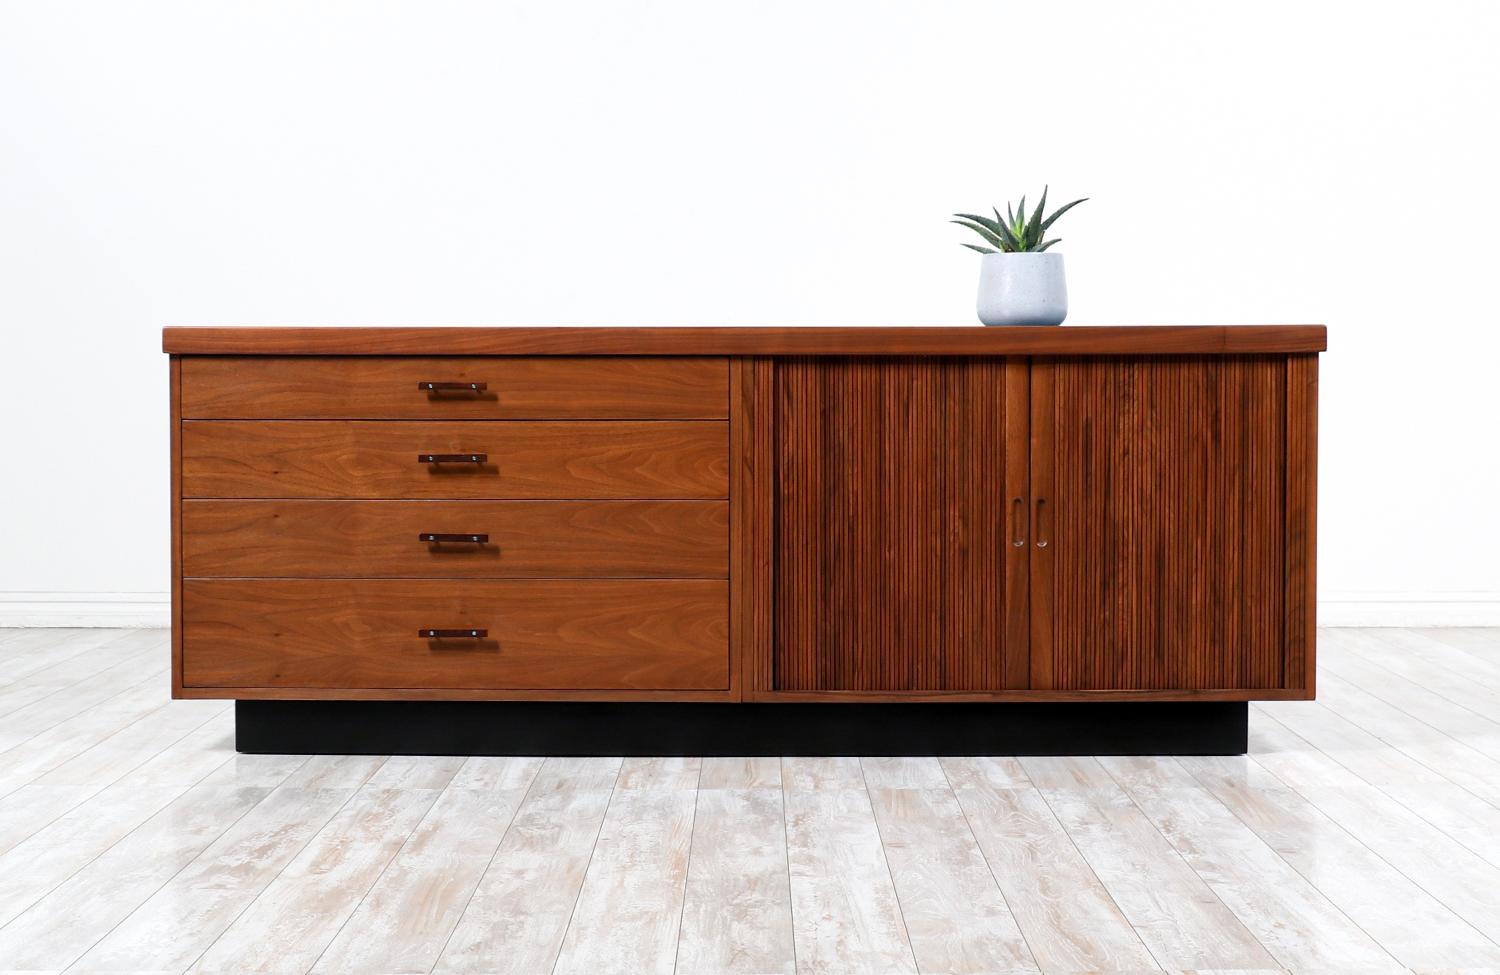 Mid Century Modern Credenza designed by Glenn of California for Glenn of California in the United States c. 1950’s. This beautiful storage piece is comprised of walnut wood. The right side features two tambour doors with recessed pulls that reveal a